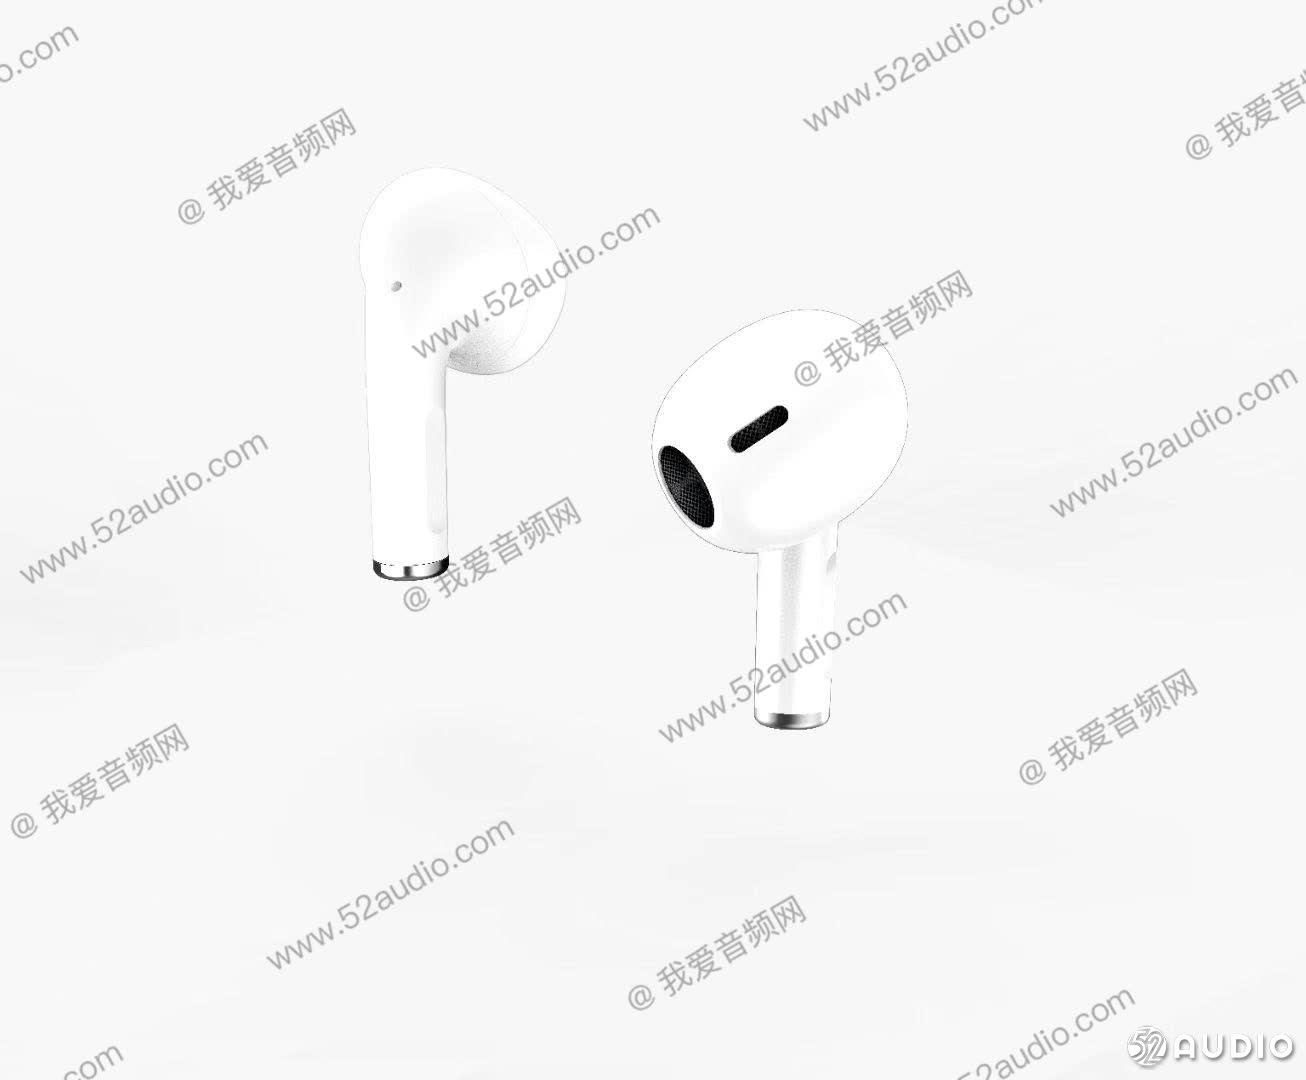 Apple AirPods 3 photos leak, showing a similar design to AirPods Pro